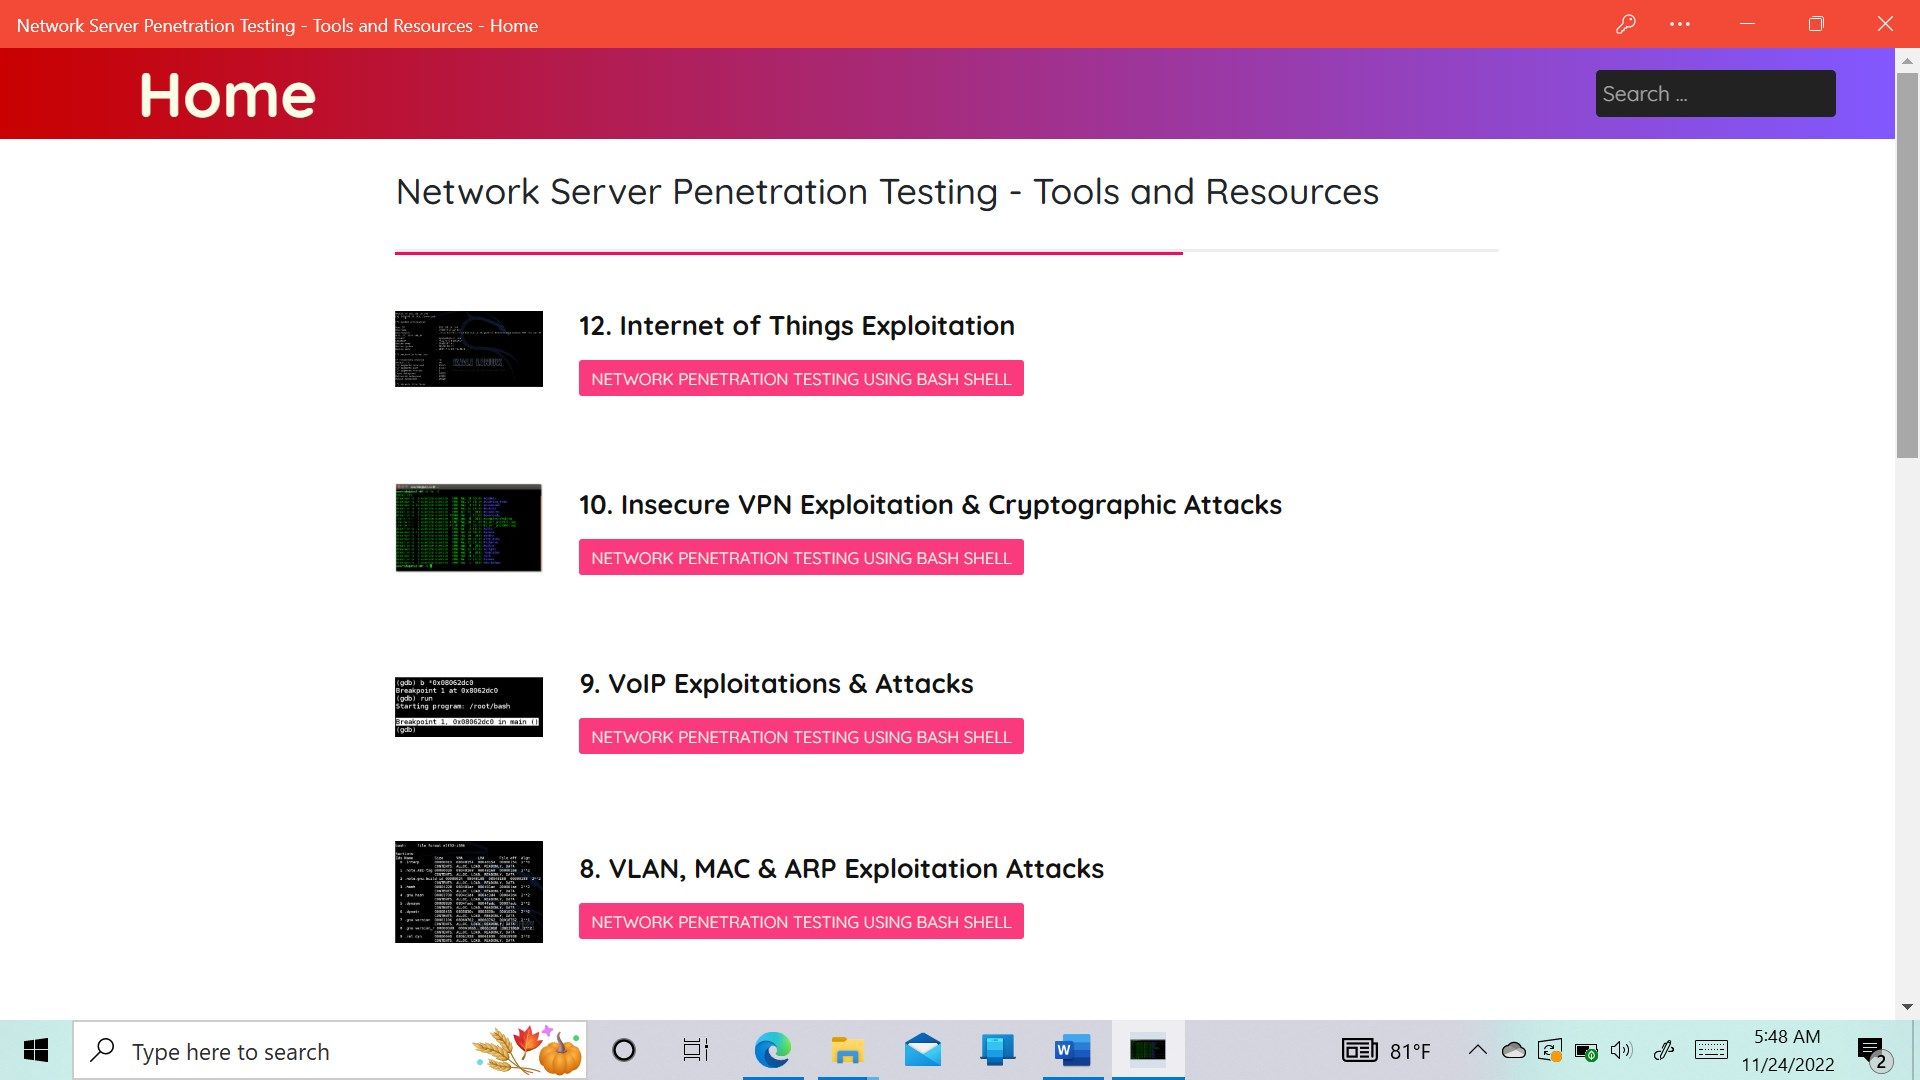 Network Server Penetration Testing - Tools and Resources